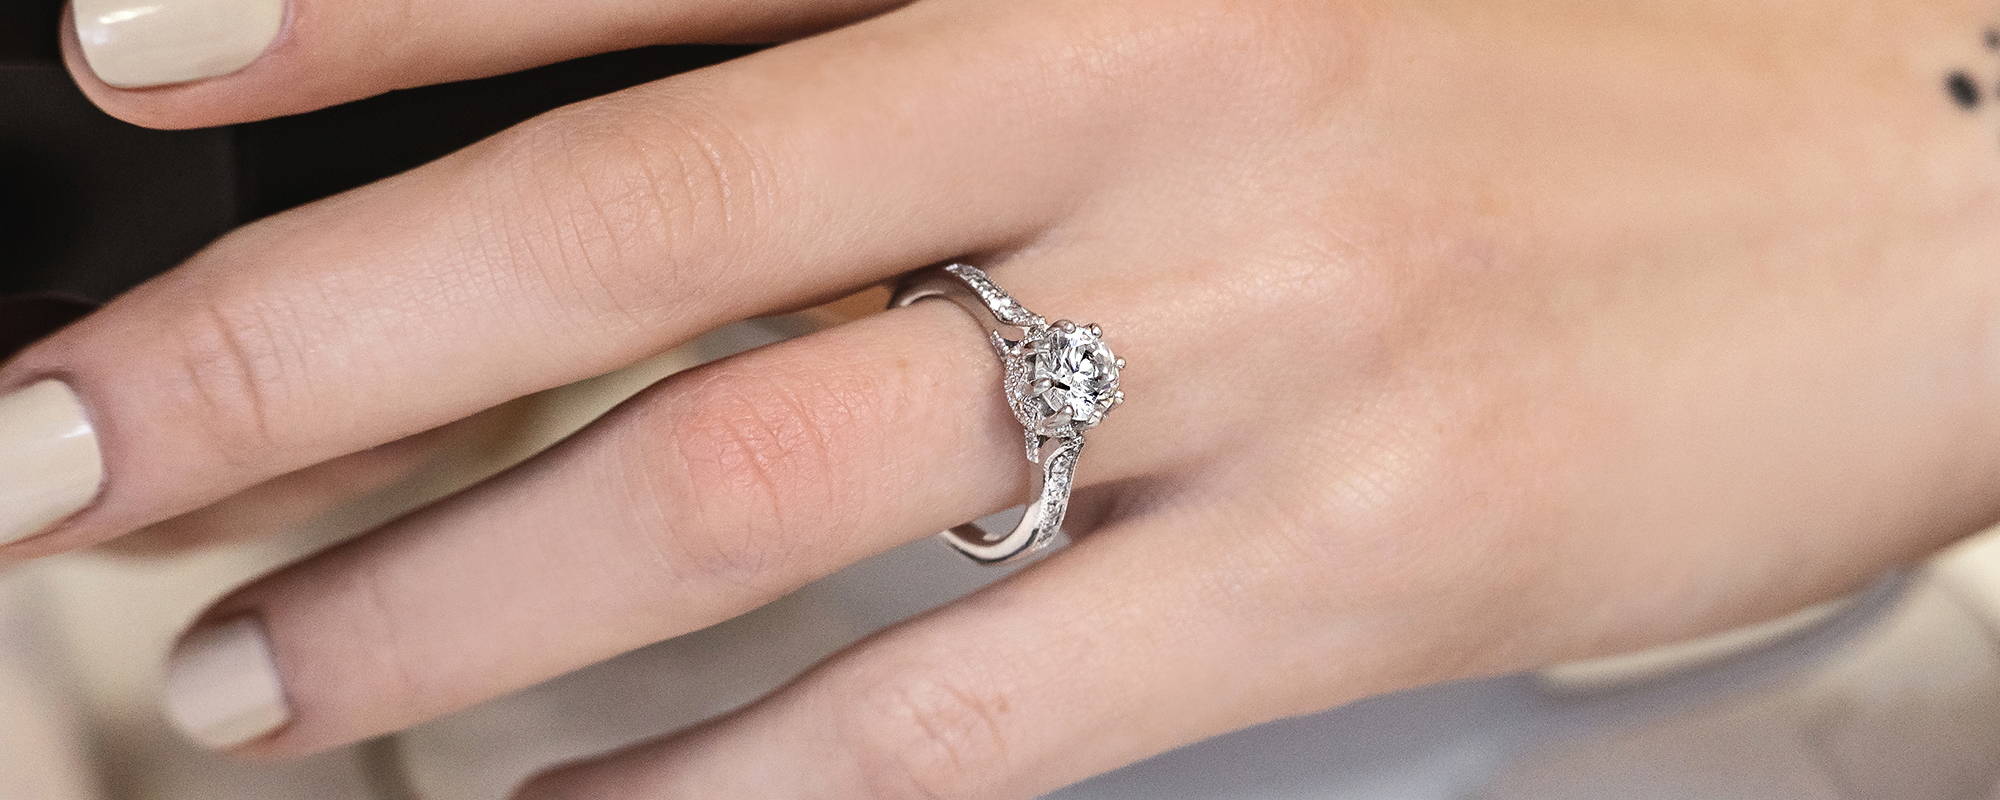 This Season’s Most Popular Vintage Engagement Ring Styles